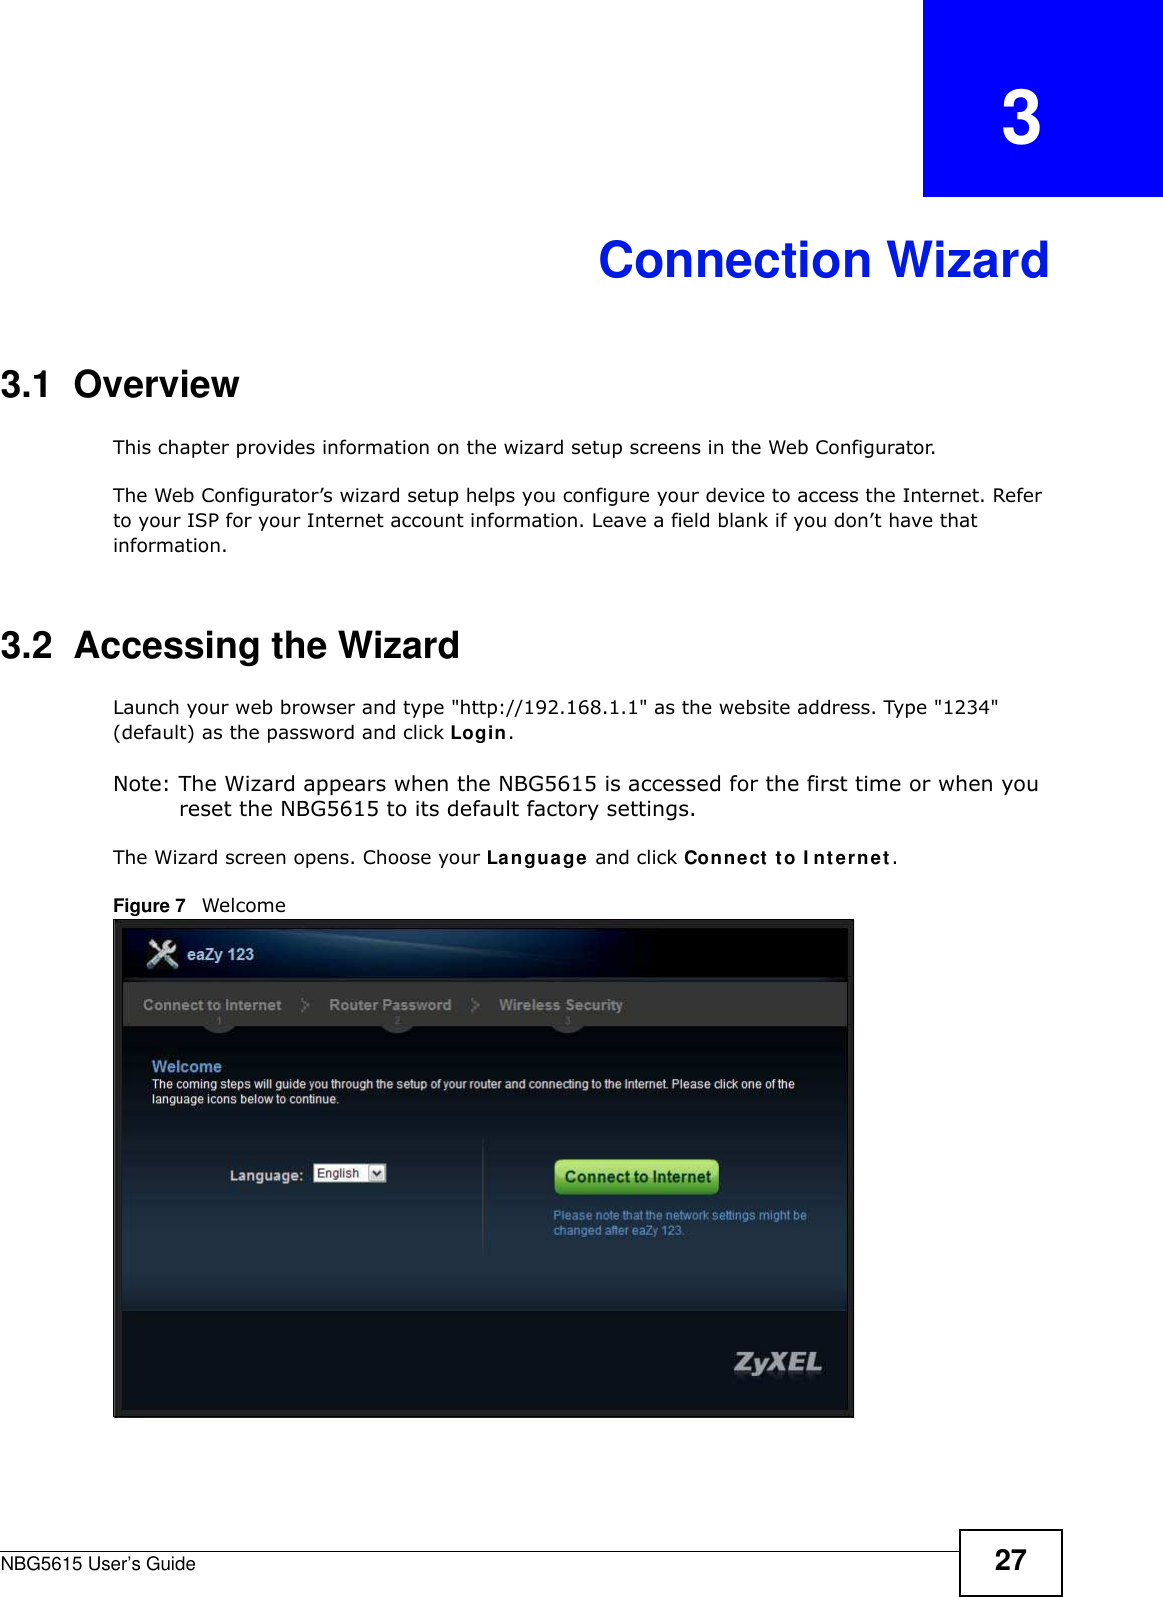 NBG5615 User’s Guide 27CHAPTER   3Connection Wizard3.1  OverviewThis chapter provides information on the wizard setup screens in the Web Configurator.The Web Configurator’s wizard setup helps you configure your device to access the Internet. Refer to your ISP for your Internet account information. Leave a field blank if you don’t have that information.3.2  Accessing the WizardLaunch your web browser and type &quot;http://192.168.1.1&quot; as the website address. Type &quot;1234&quot; (default) as the password and click Login.Note: The Wizard appears when the NBG5615 is accessed for the first time or when you reset the NBG5615 to its default factory settings.The Wizard screen opens. Choose your Language and click Connect to I nternet.Figure 7   Welcome 